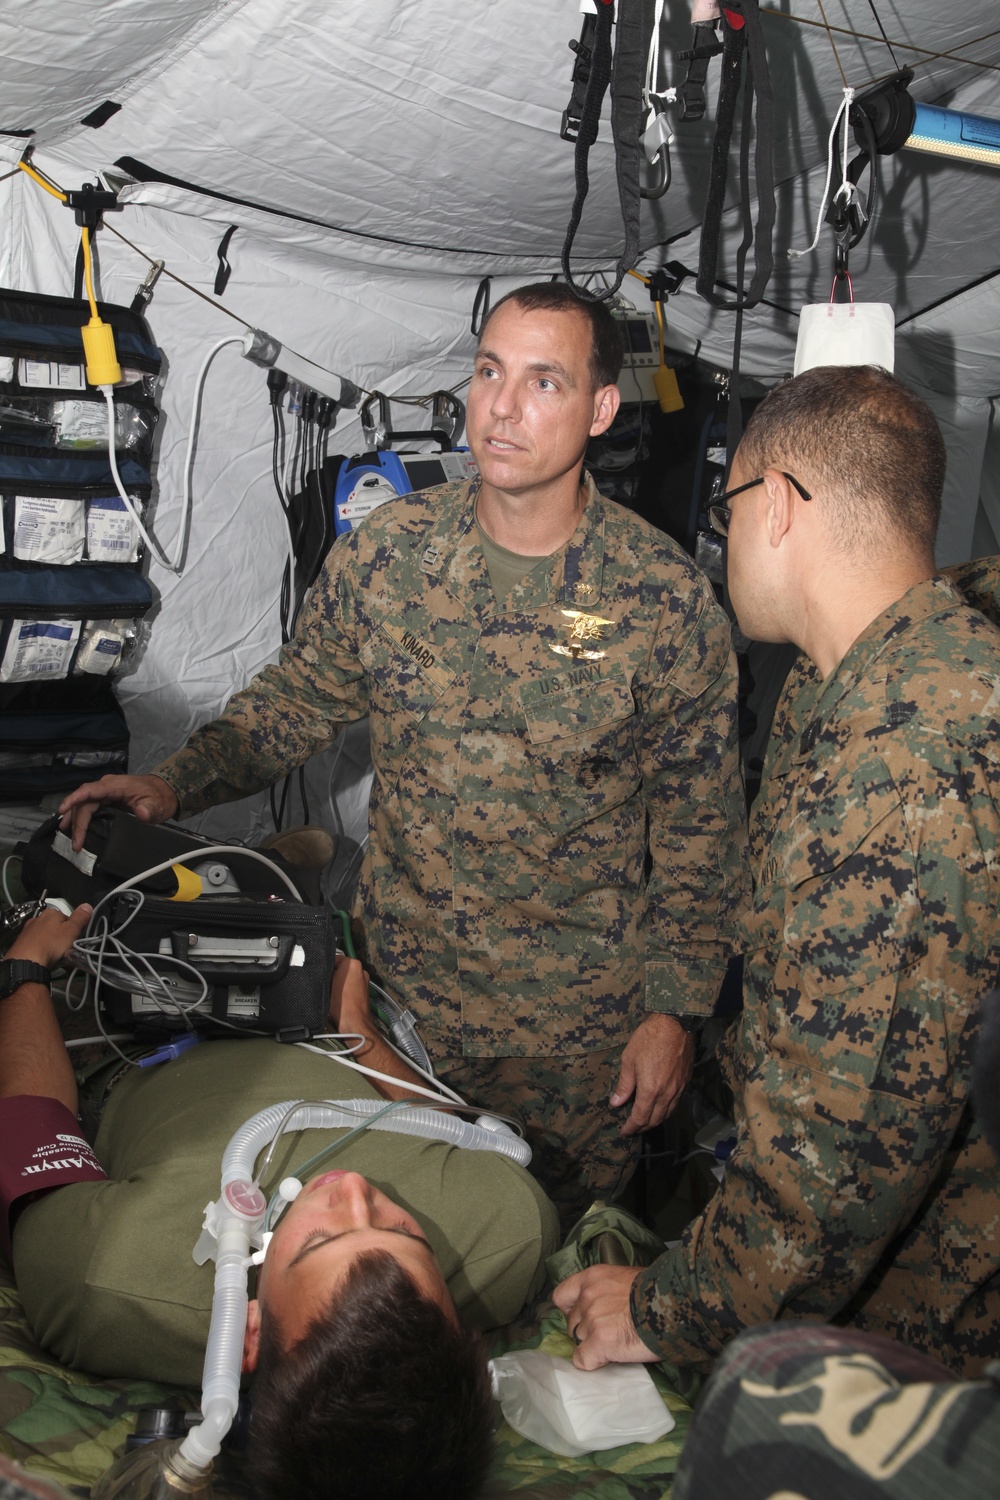 U.S. Navy corpsman share capabilities with Philippine counterparts